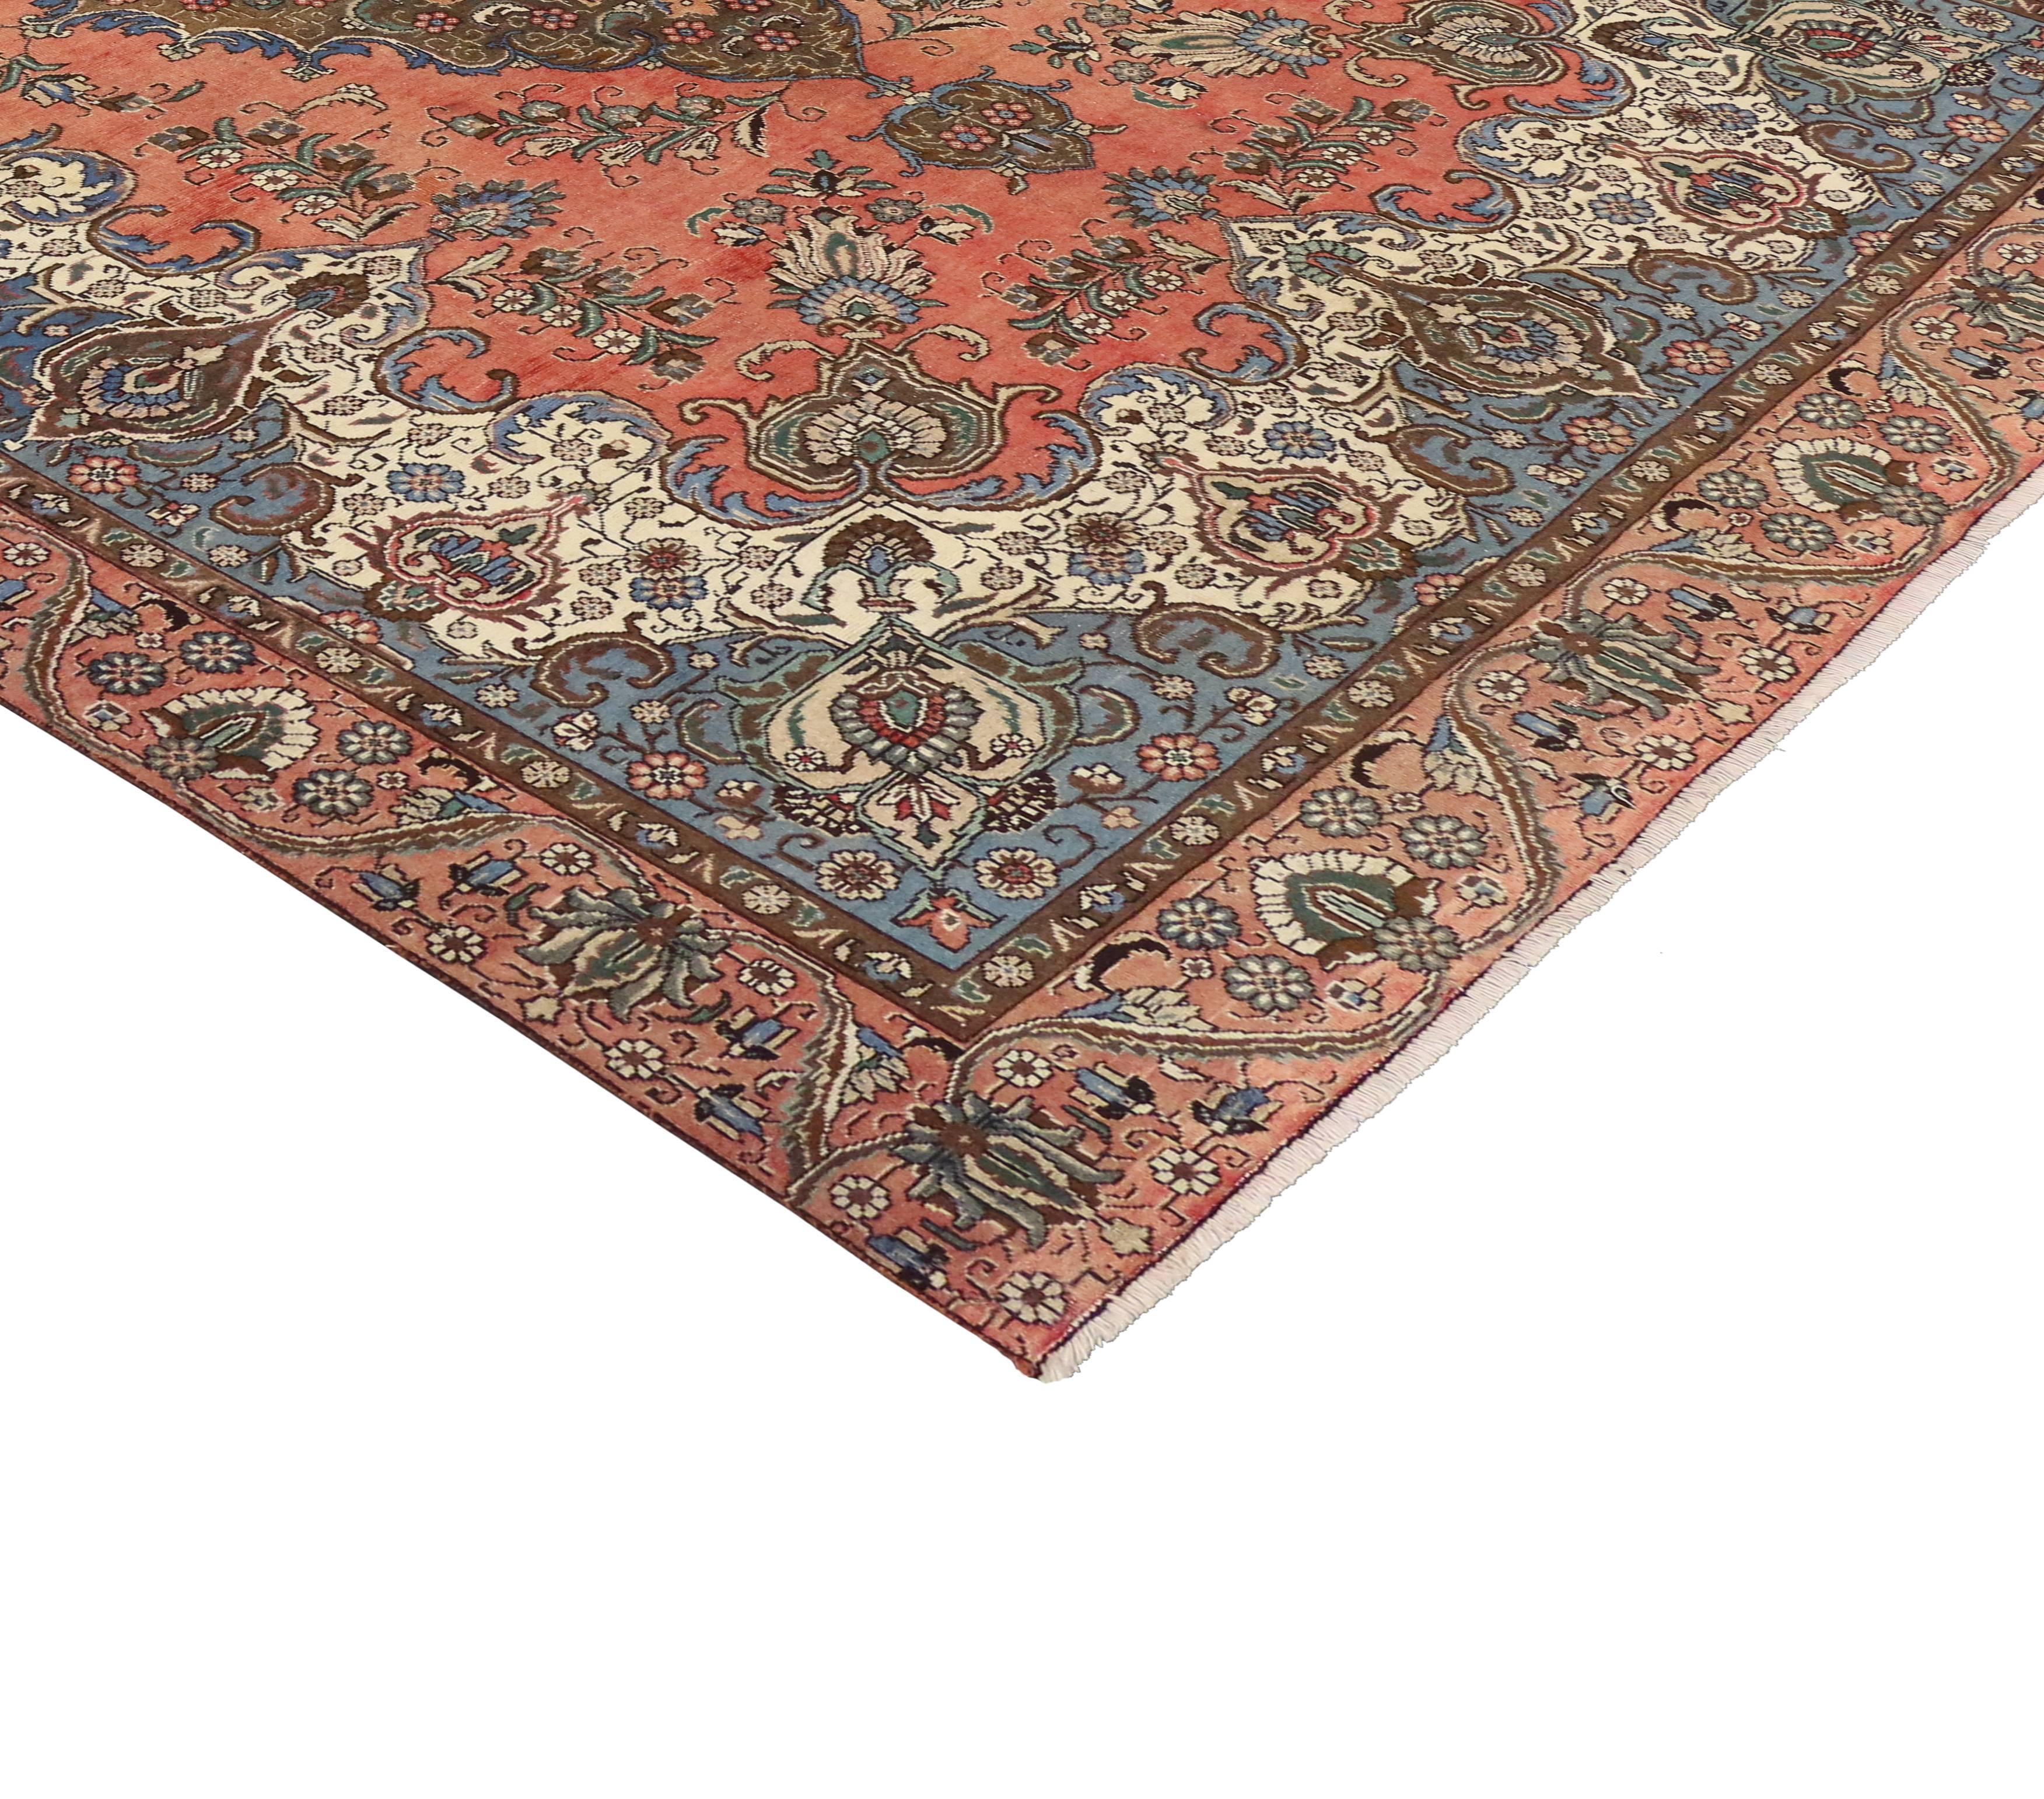 A beautifully detailed vintage Persian Tabriz rug boasts an intricate center medallion and elegant serenity blue spandrels with an impressive all-over pattern. The refined palette consists of Pantone's serenity blue, peach echo and iced coffee brown